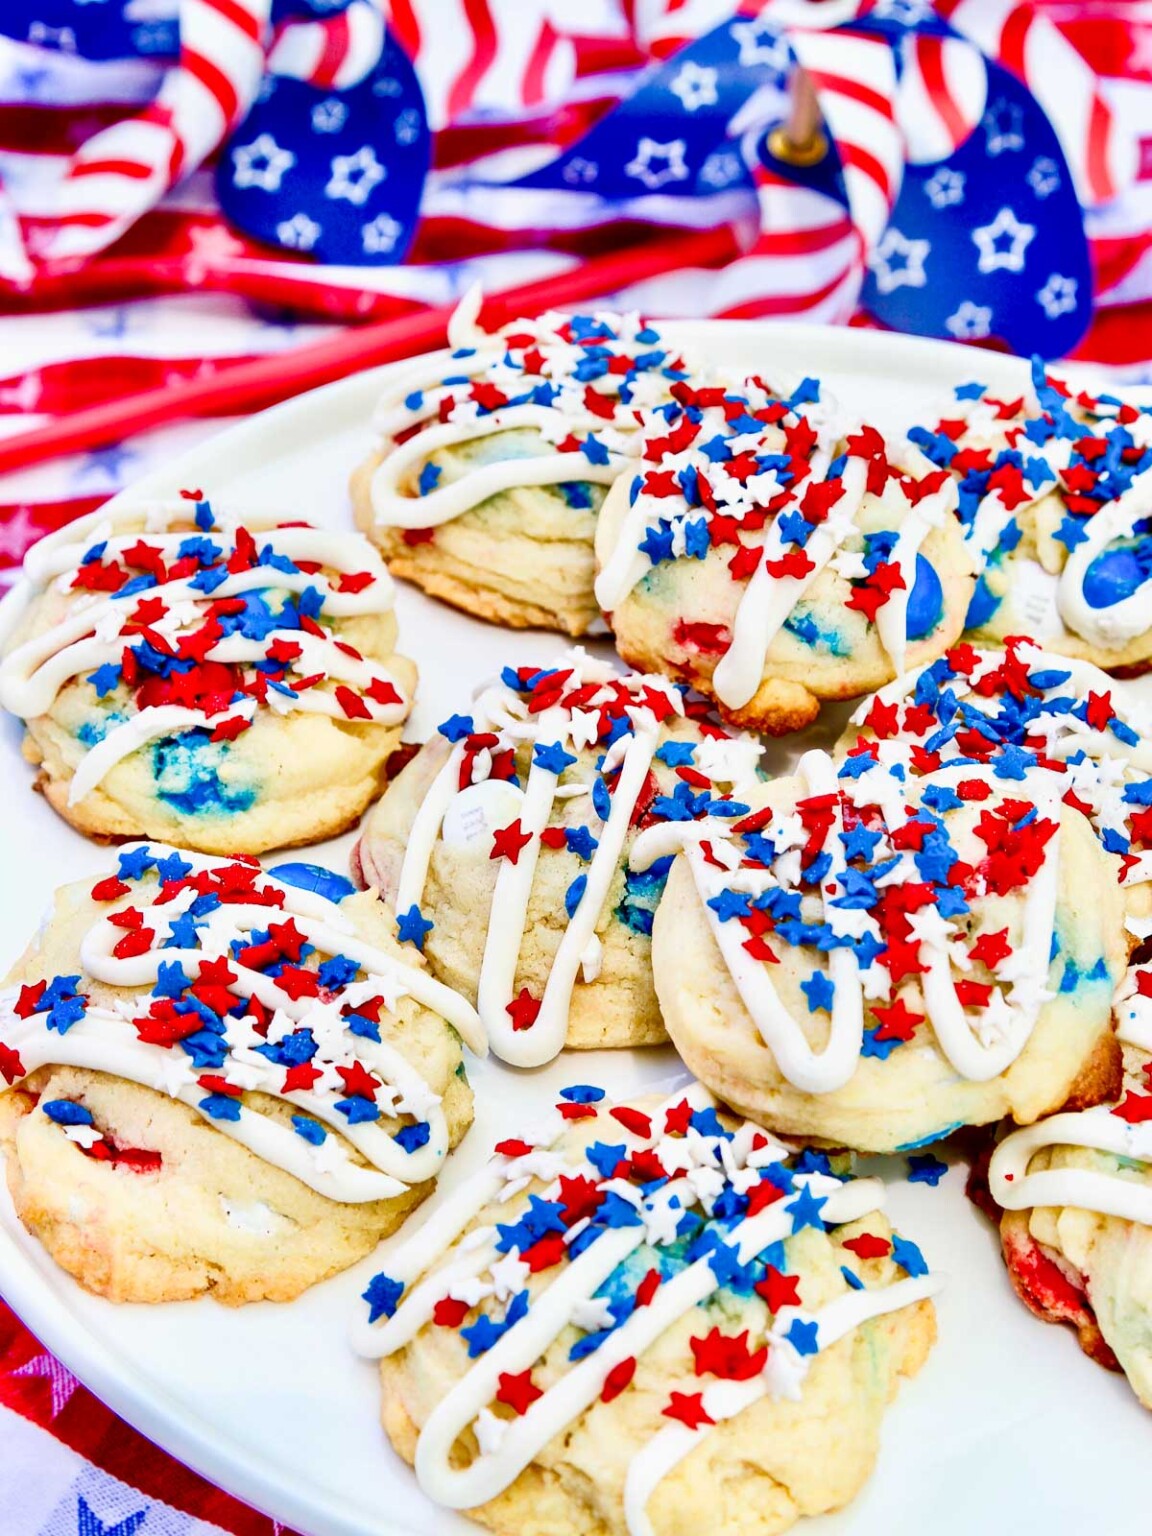 Celebrate 4th of July with Tasty Cookies